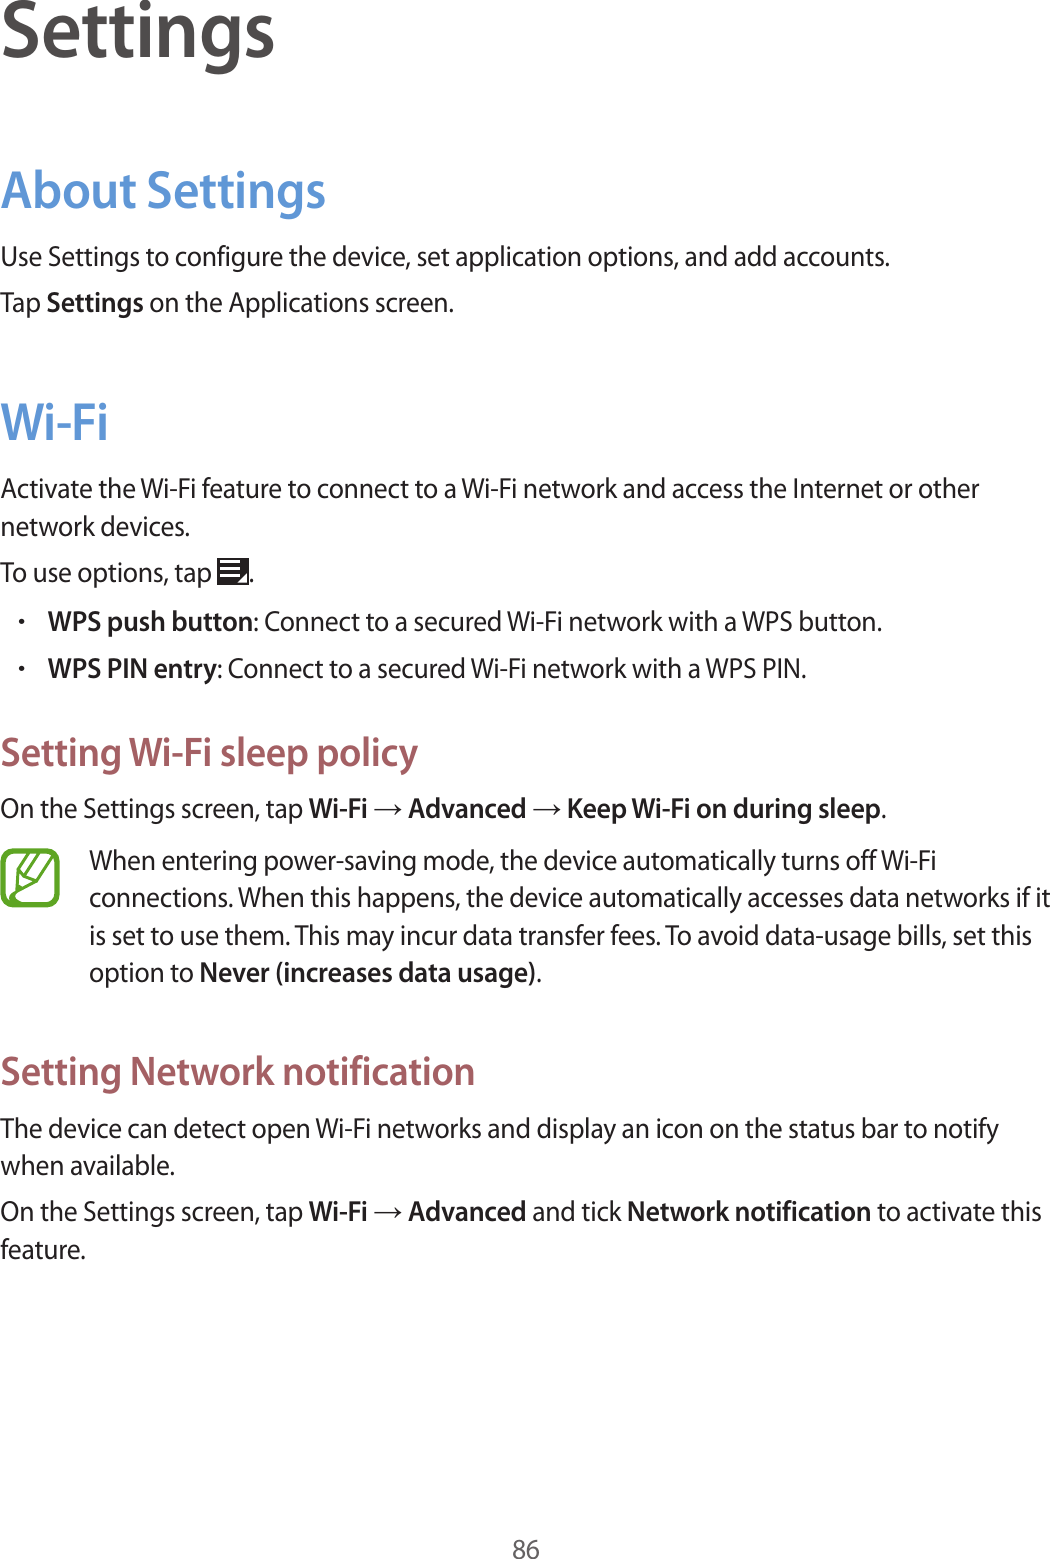 86SettingsAbout SettingsUse Settings to configure the device, set application options, and add accounts.Tap Settings on the Applications screen.Wi-FiActivate the Wi-Fi feature to connect to a Wi-Fi network and access the Internet or other network devices.To use options, tap  .•WPS push button: Connect to a secured Wi-Fi network with a WPS button.•WPS PIN entry: Connect to a secured Wi-Fi network with a WPS PIN.Setting Wi-Fi sleep policyOn the Settings screen, tap Wi-Fi → Advanced → Keep Wi-Fi on during sleep.When entering power-saving mode, the device automatically turns off Wi-Fi connections. When this happens, the device automatically accesses data networks if it is set to use them. This may incur data transfer fees. To avoid data-usage bills, set this option to Never (increases data usage).Setting Network notificationThe device can detect open Wi-Fi networks and display an icon on the status bar to notify when available.On the Settings screen, tap Wi-Fi → Advanced and tick Network notification to activate this feature.